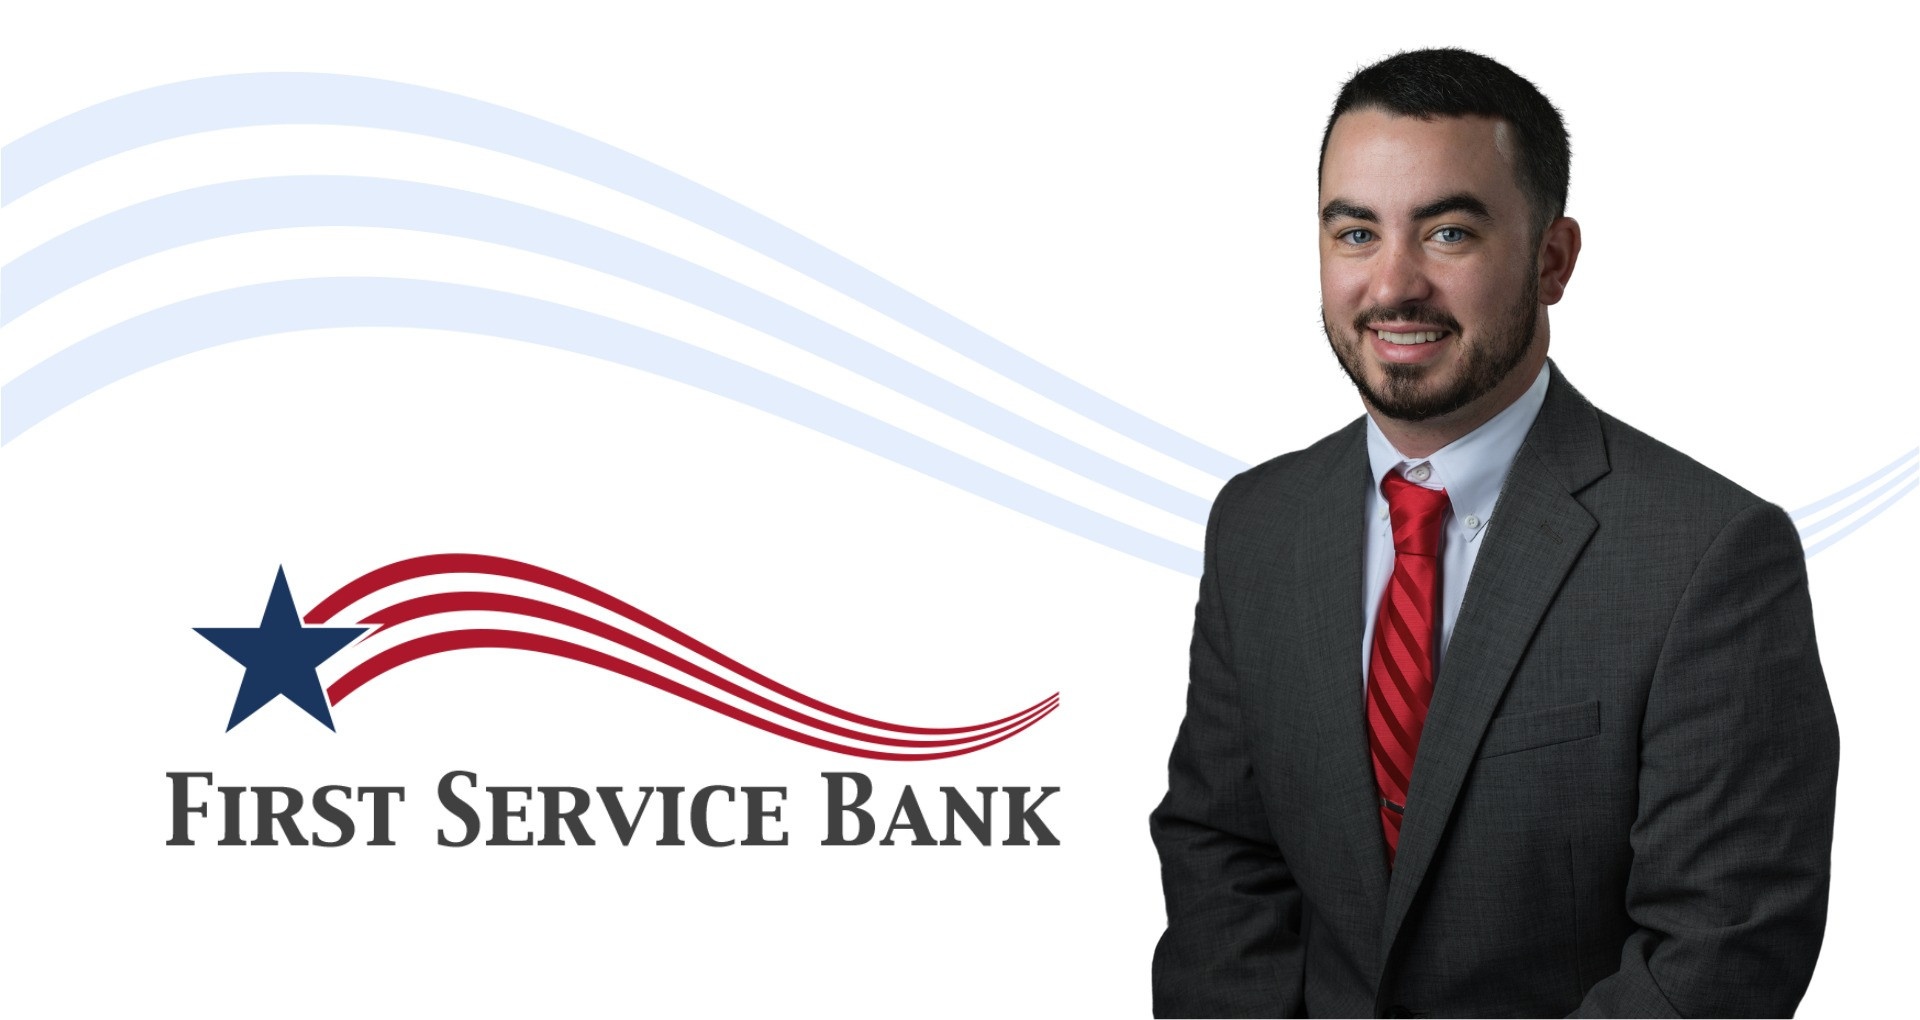 Brayden Salmon Appointed as Branch Manager and Loan Officer at First Service Bank